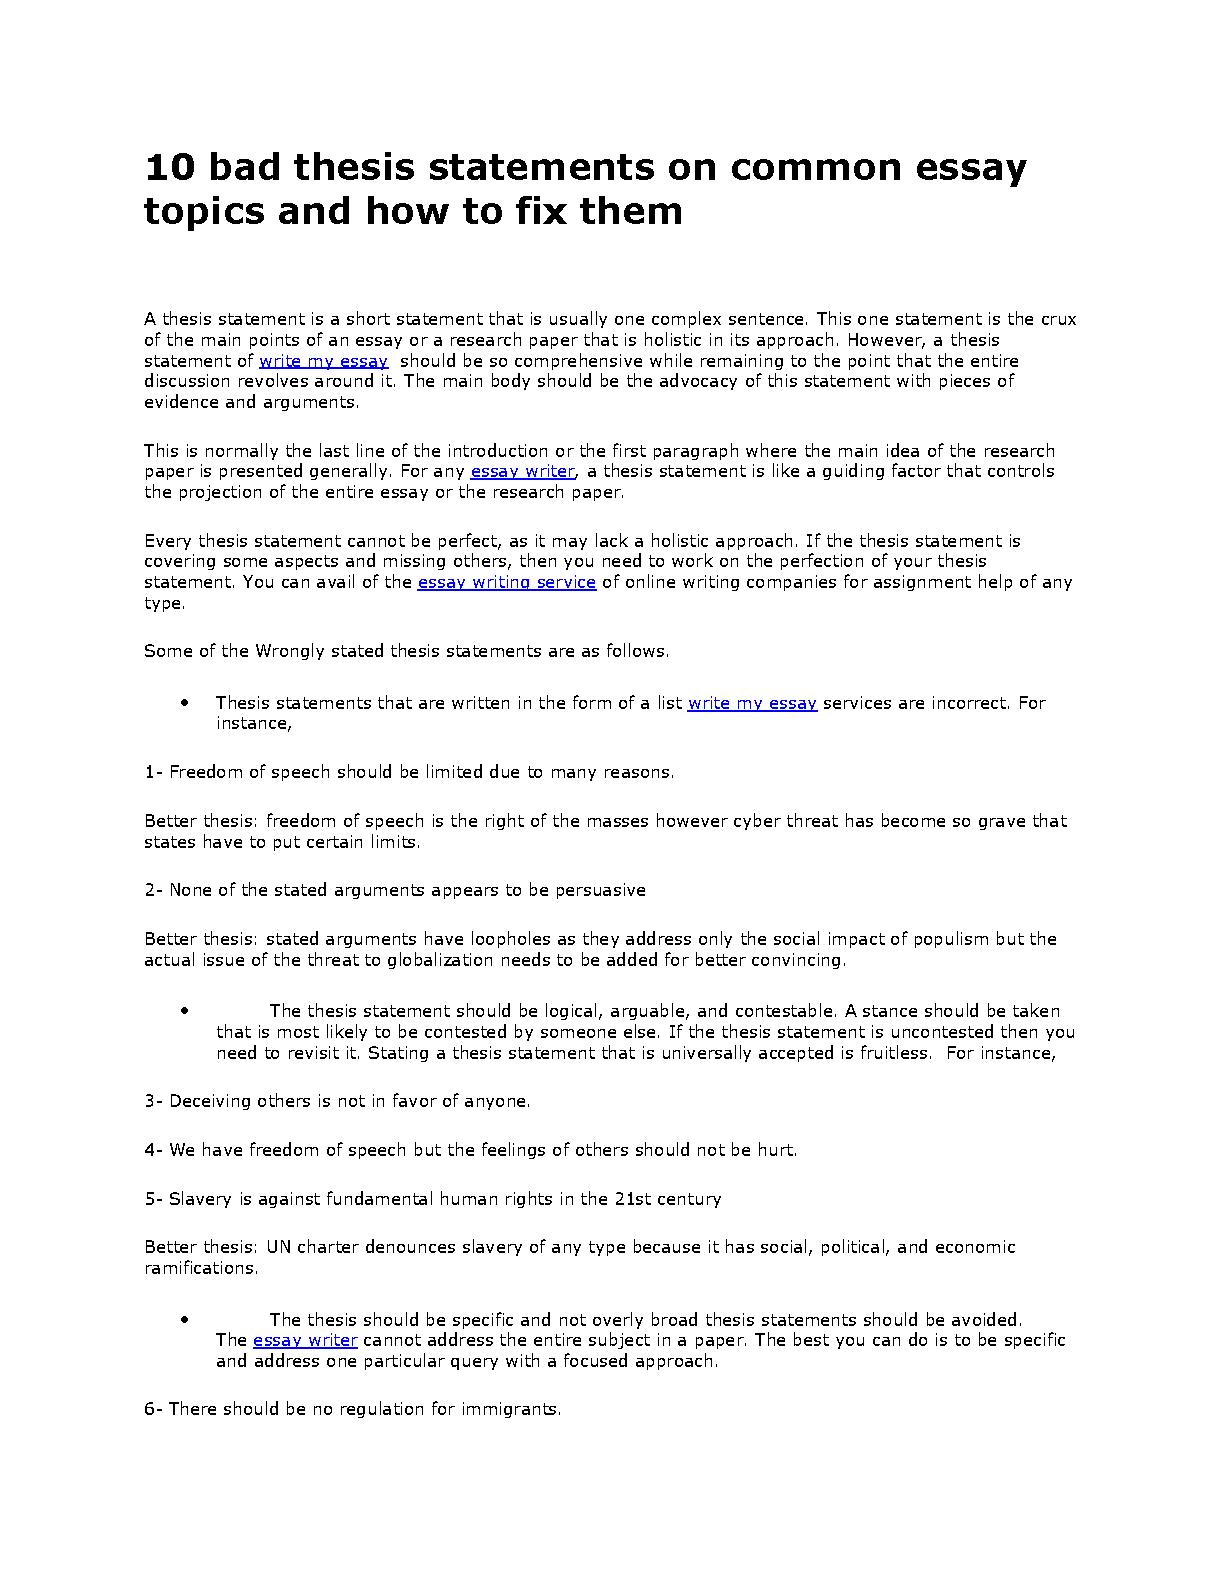 examples of bad thesis statements